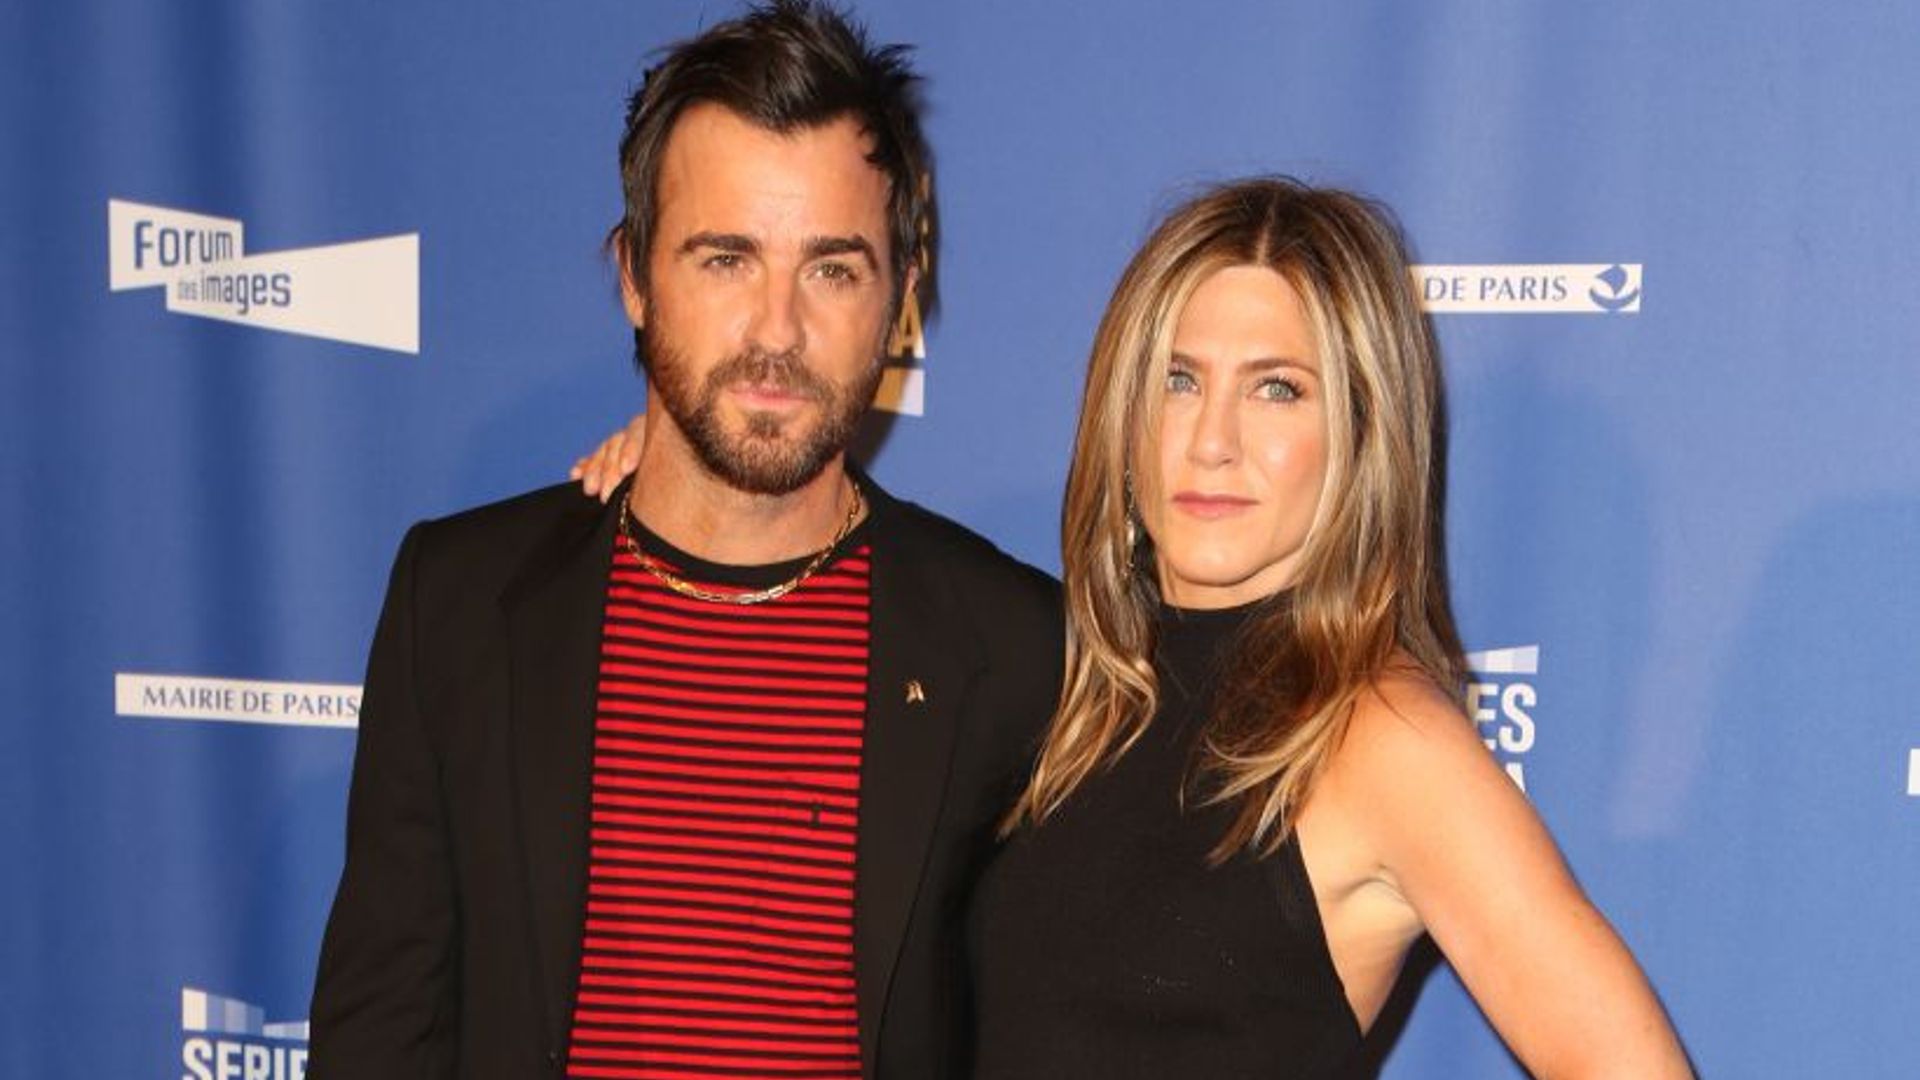 Jennifer Aniston and Justin Theroux Are in 'Louvre